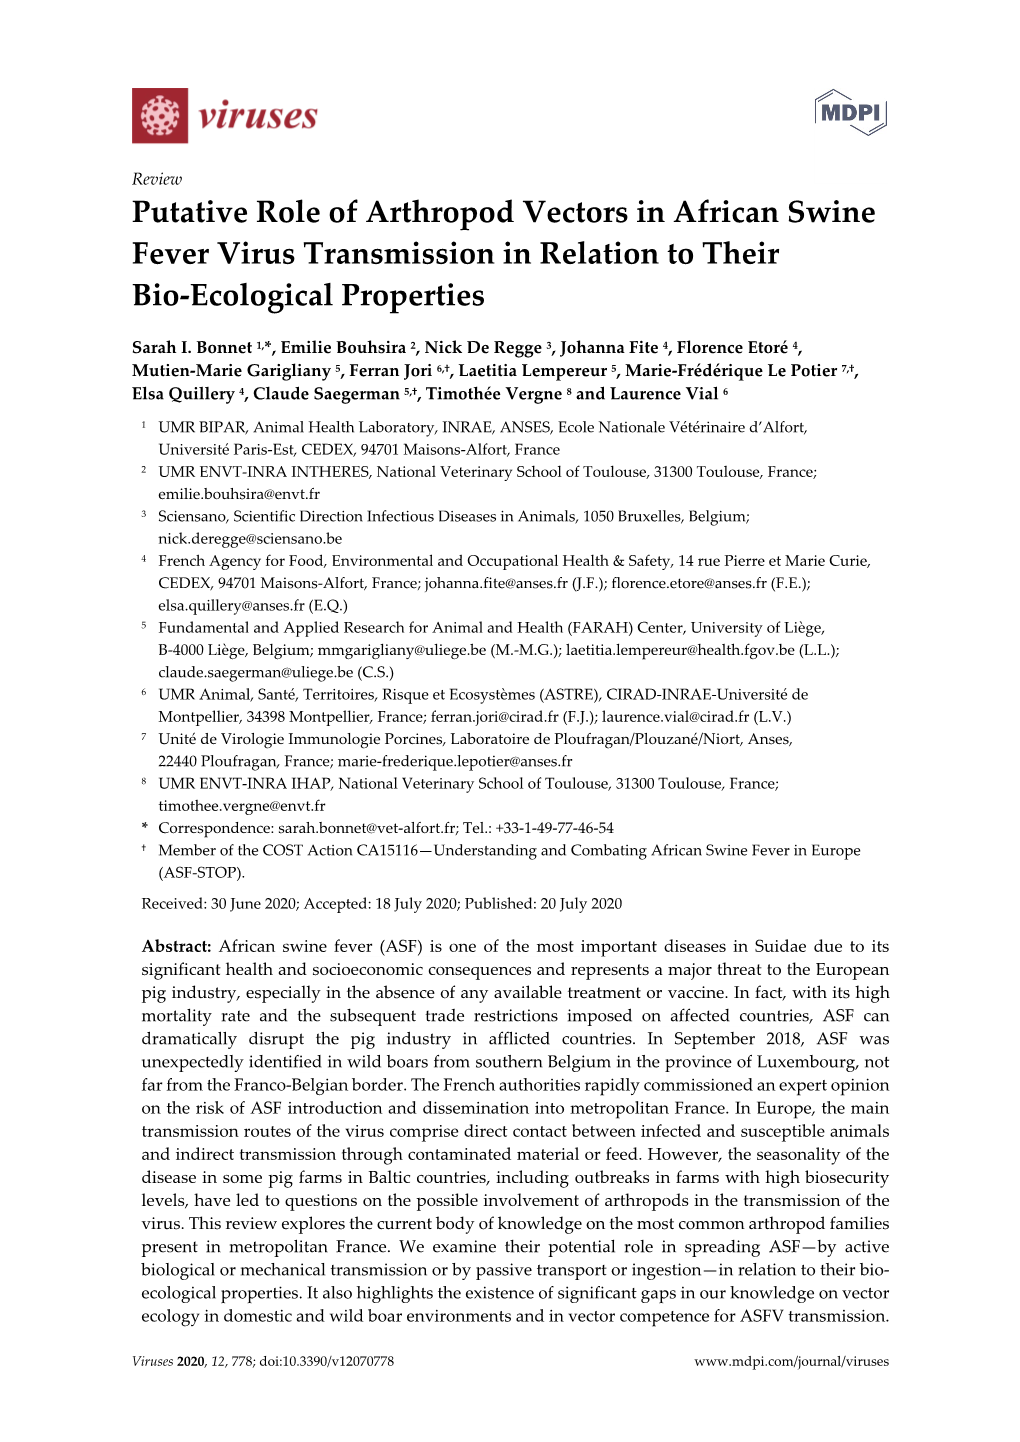 Putative Role of Arthropod Vectors in African Swine Fever Virus Transmission in Relation to Their Bio-Ecological Properties